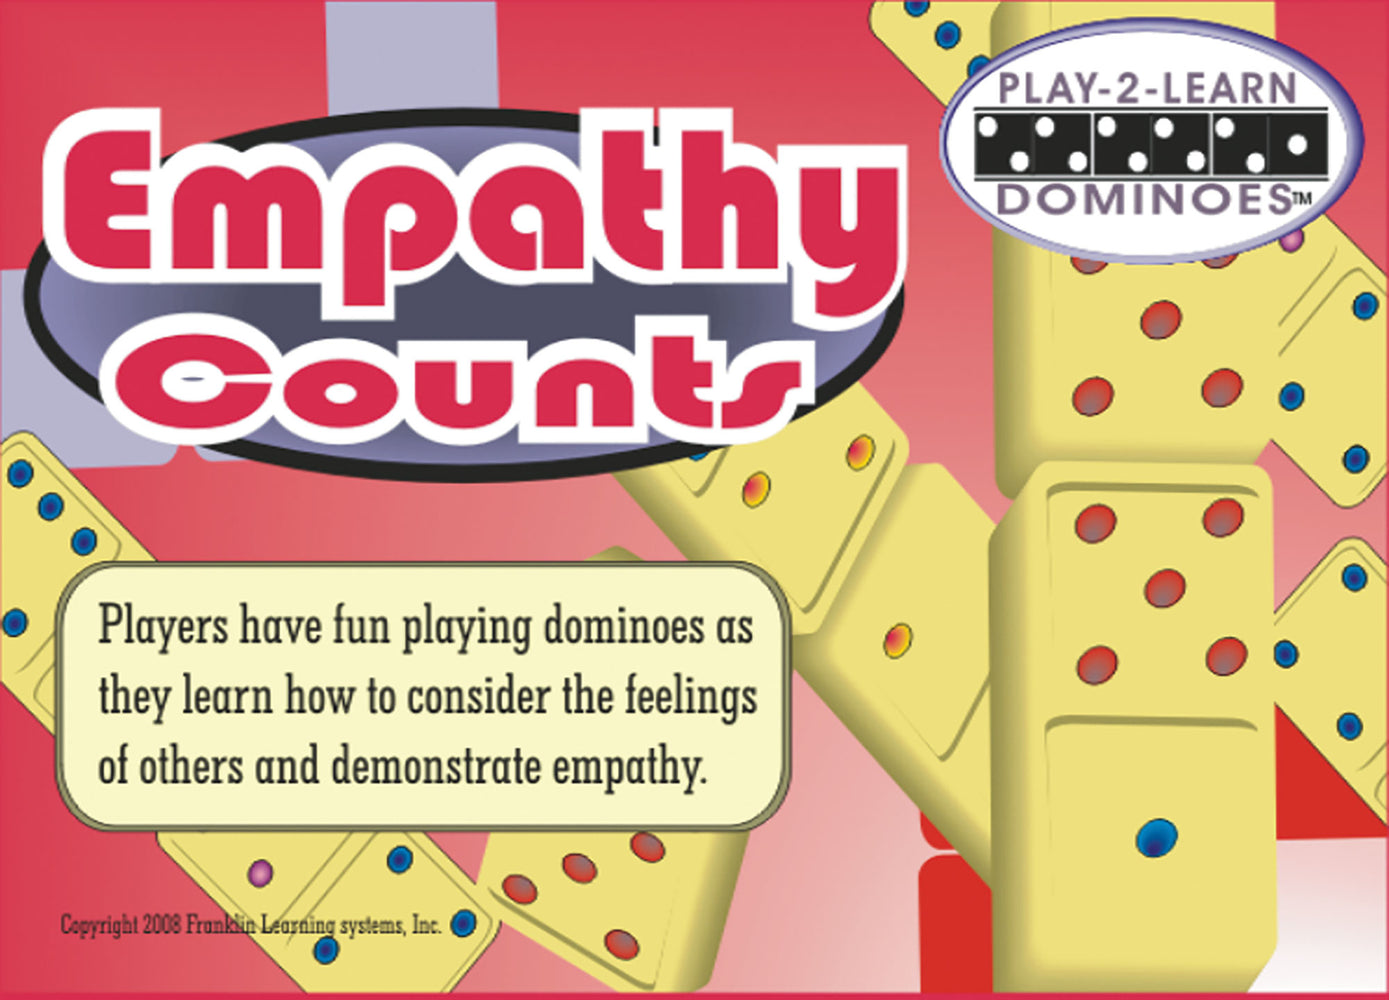 Empathy Counts: Play-2-Learn Dominoes